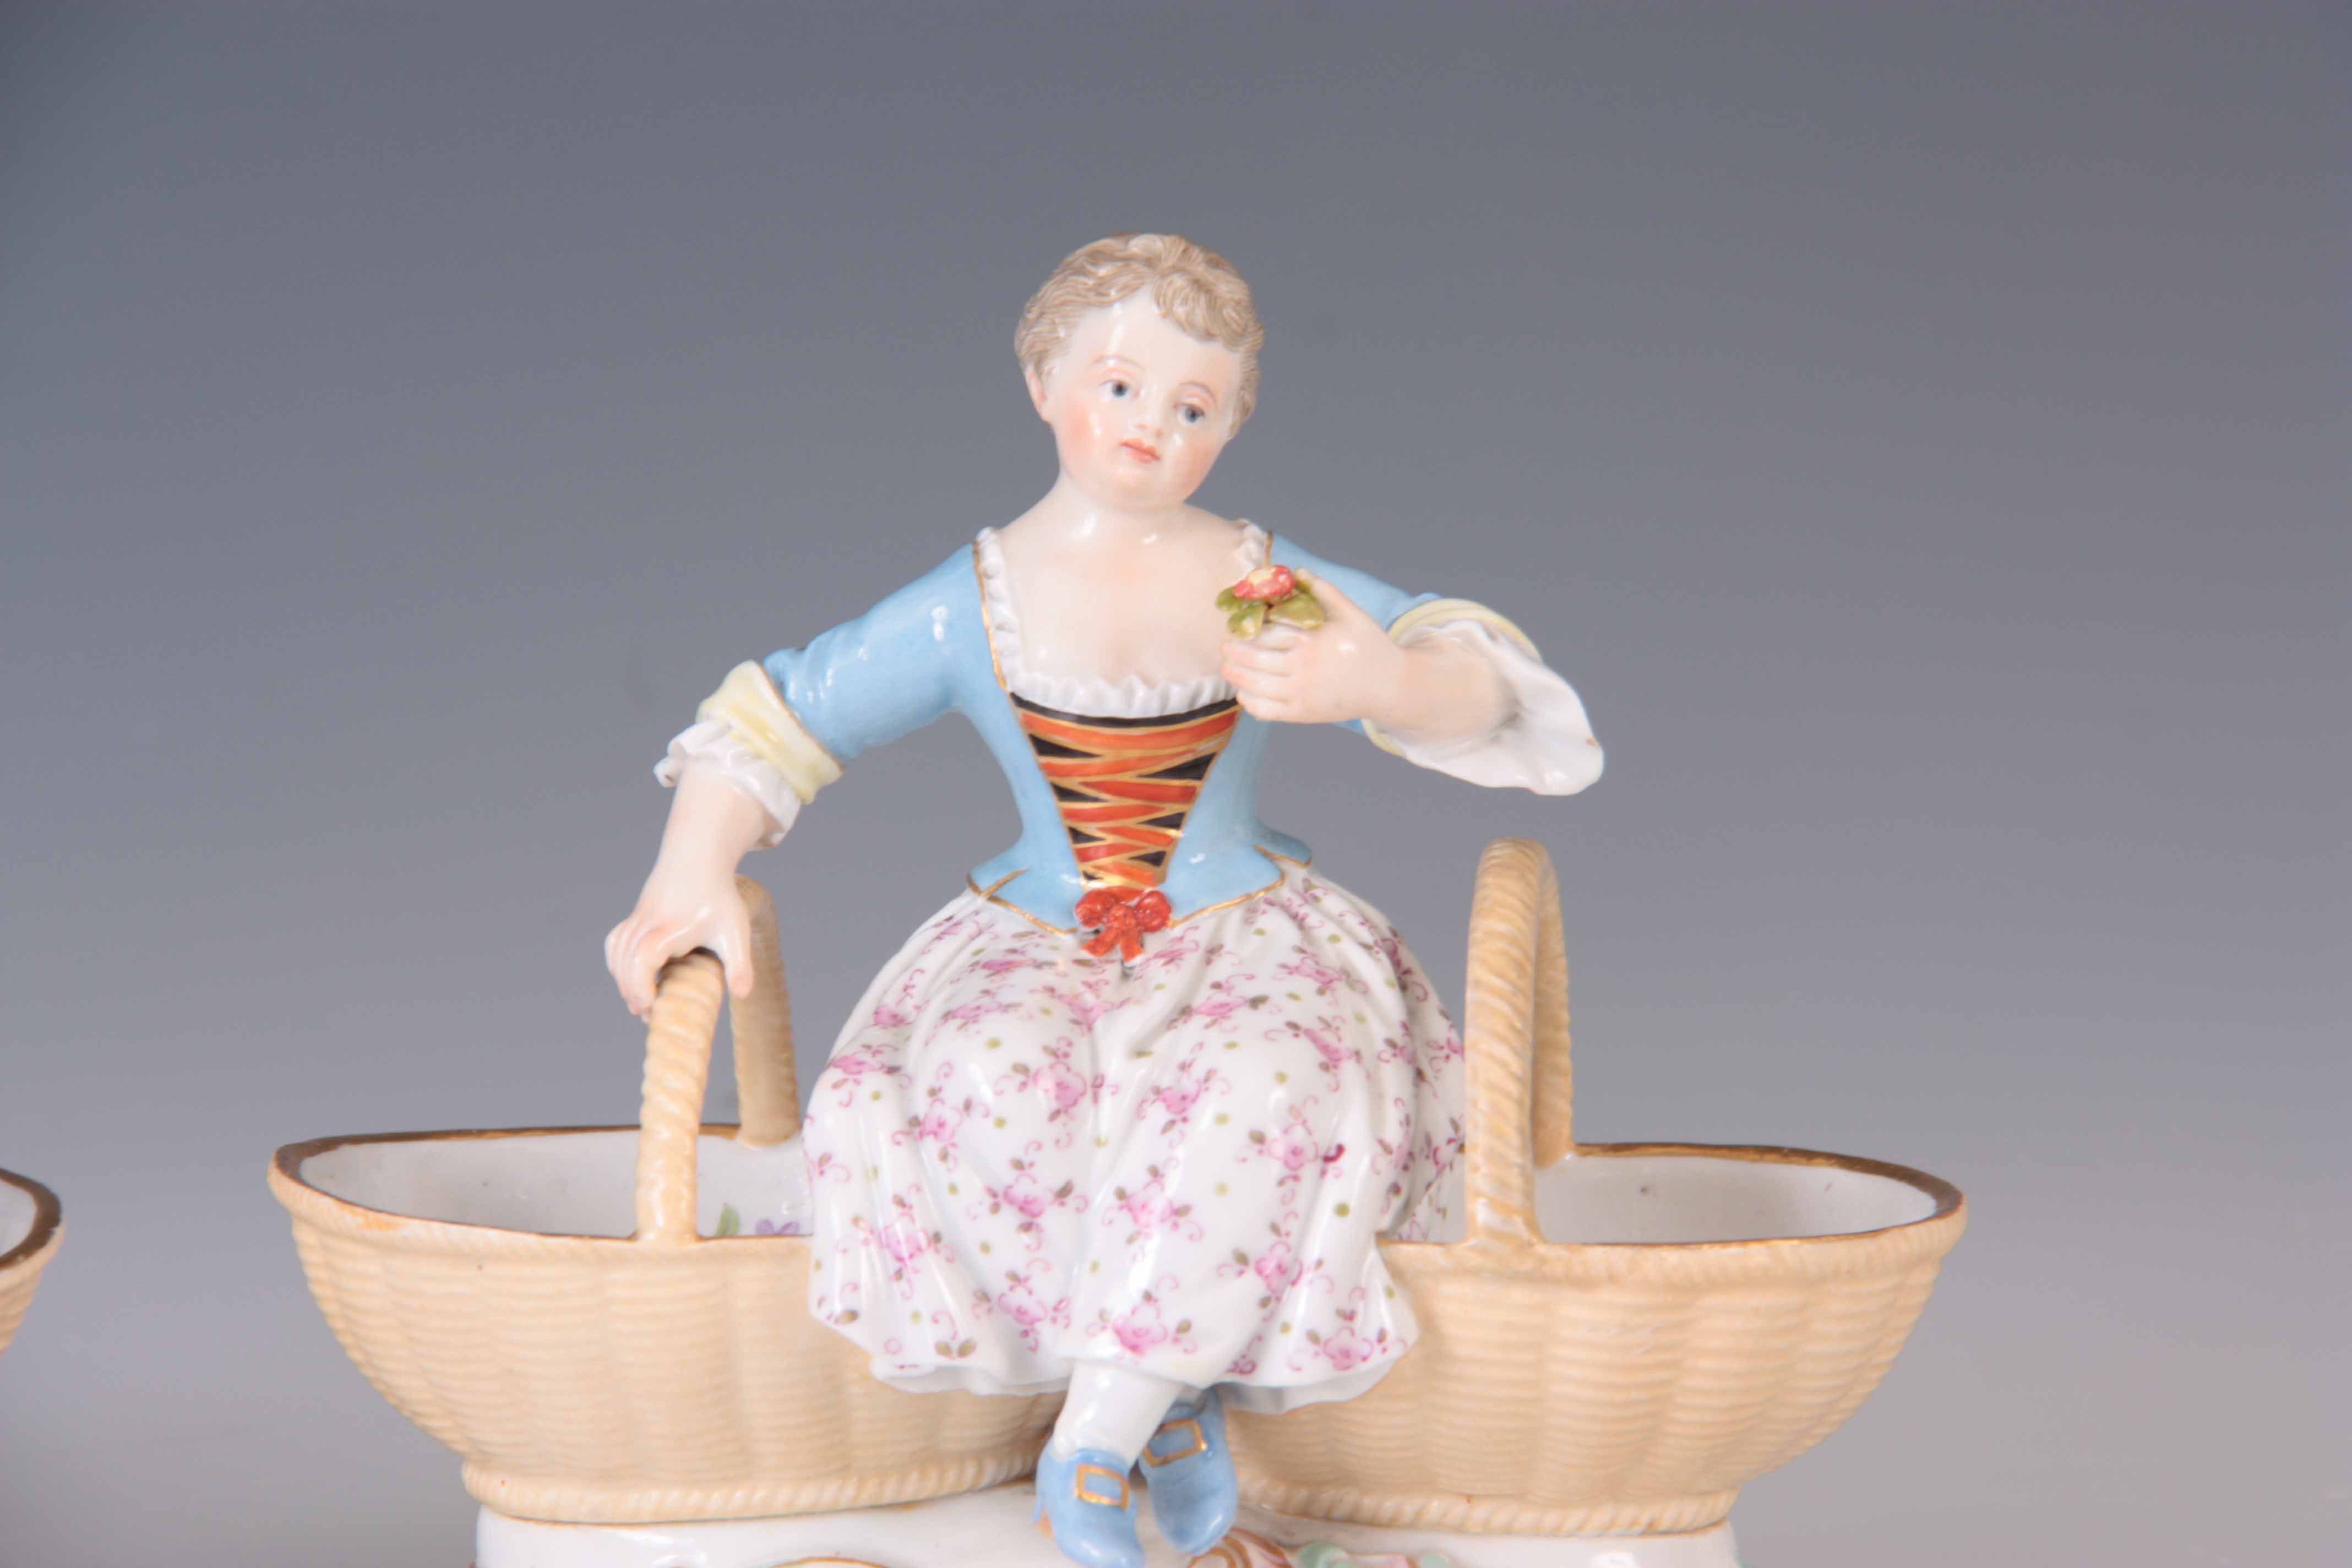 A PAIR OF 19TH CENTURY MEISSEN PORCELAIN TABLE SALTS depicting a young boy and girl sat between - Image 3 of 5